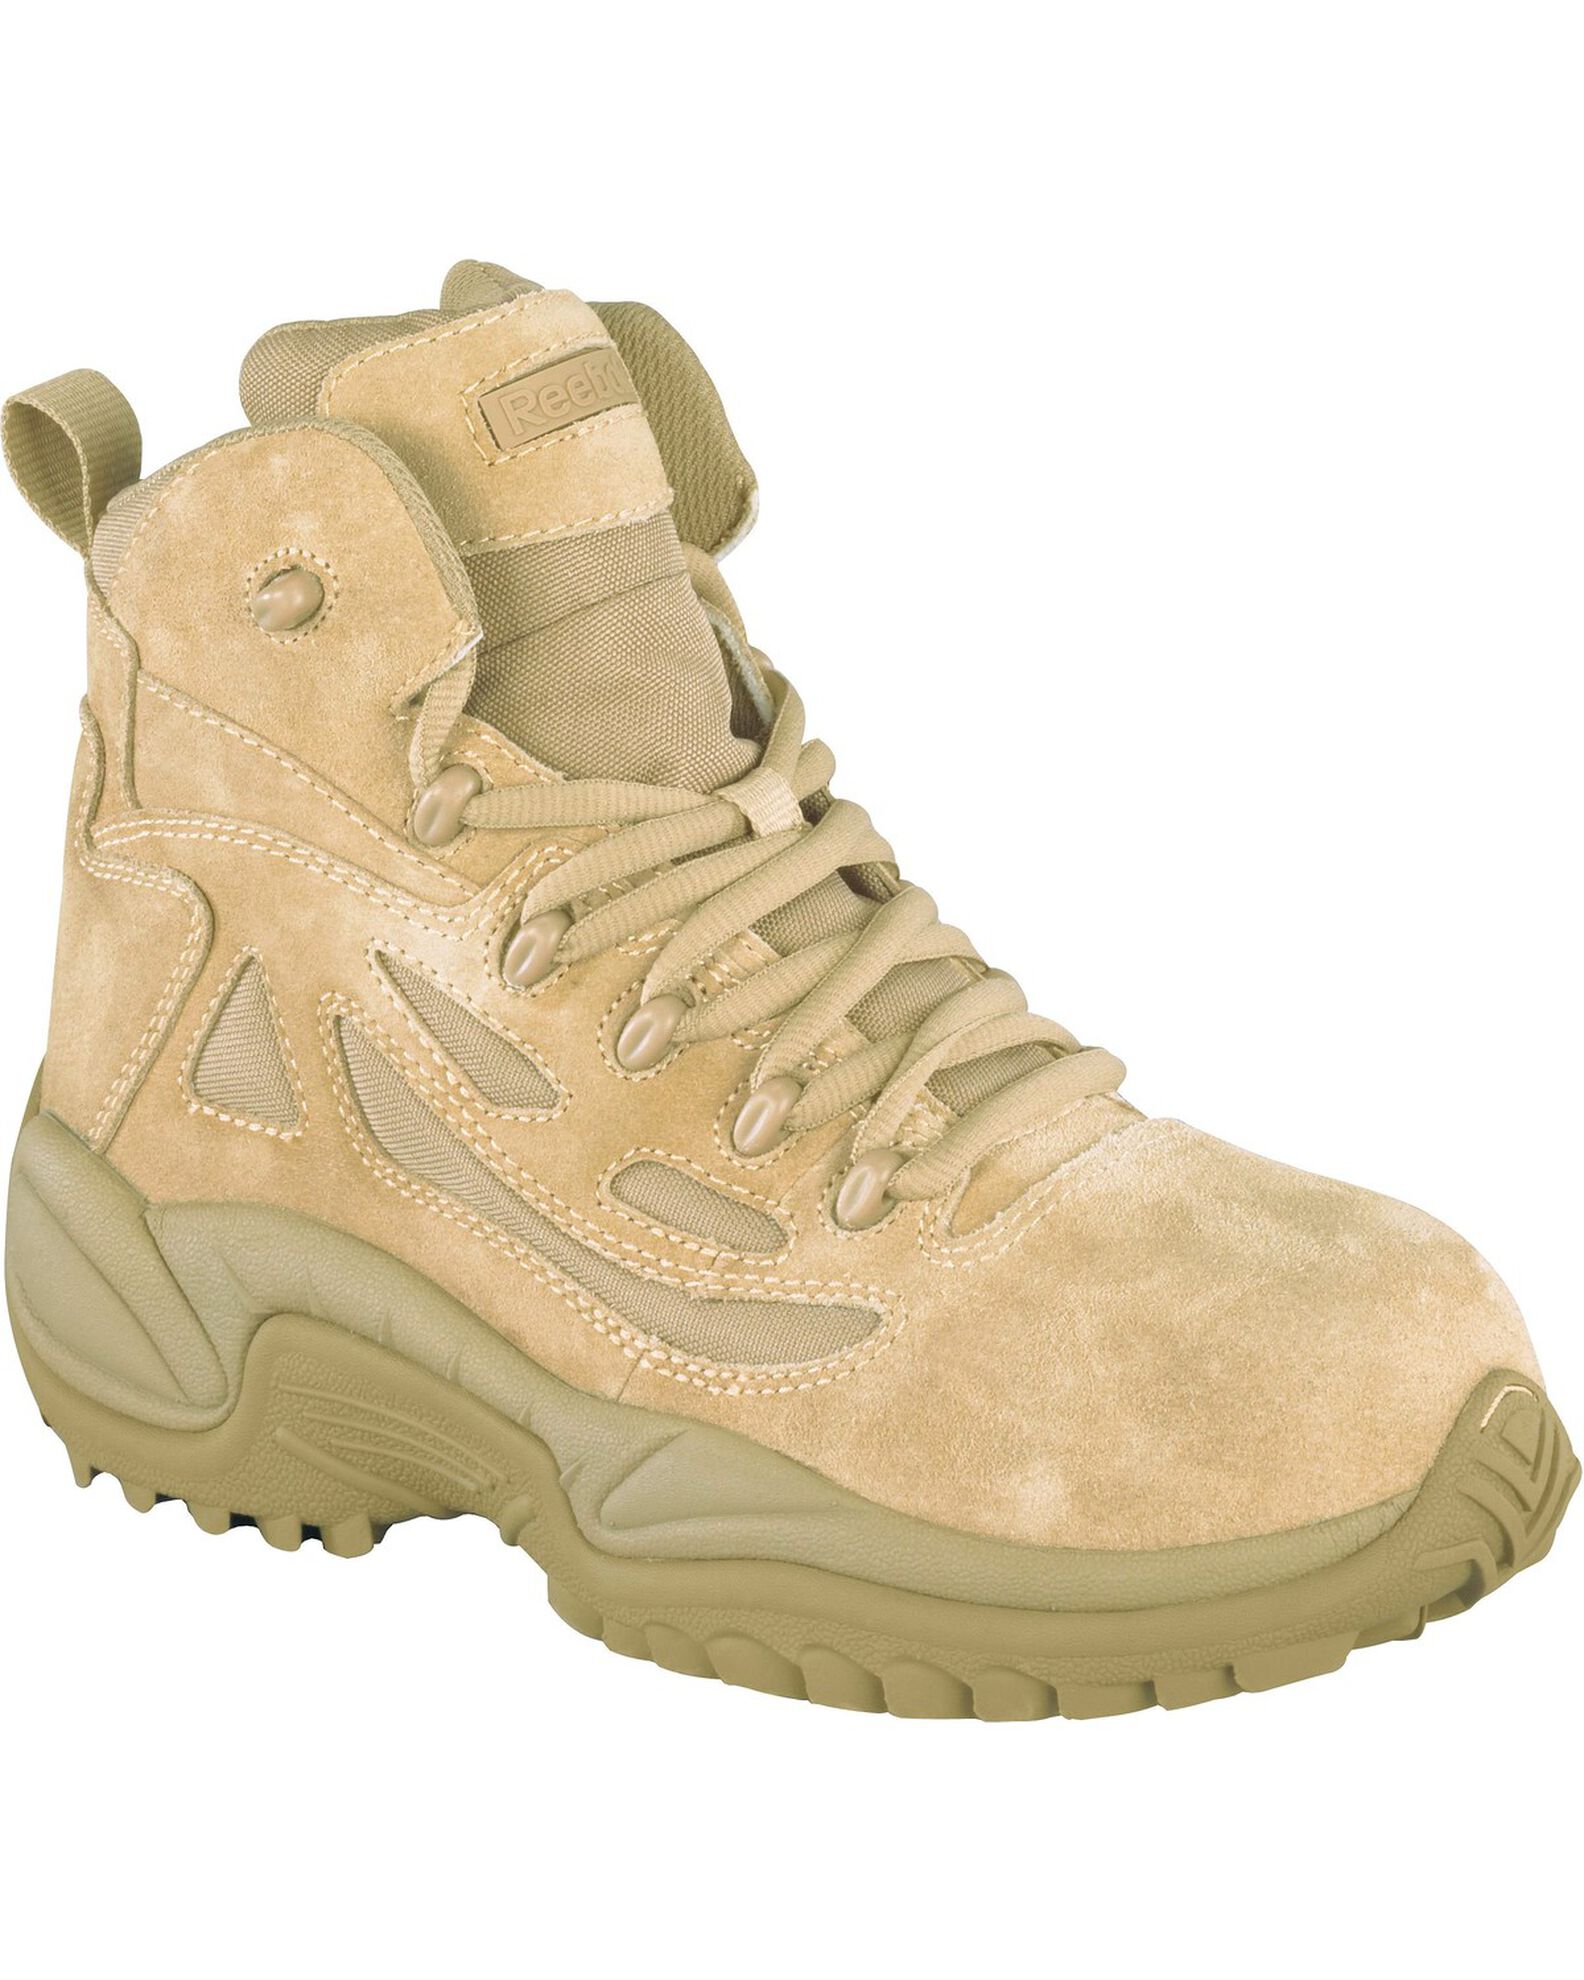 Men's Stealth 6" Lace-Up with Side-Zip Tactical Work Boots - Composite Toe | Boot Barn